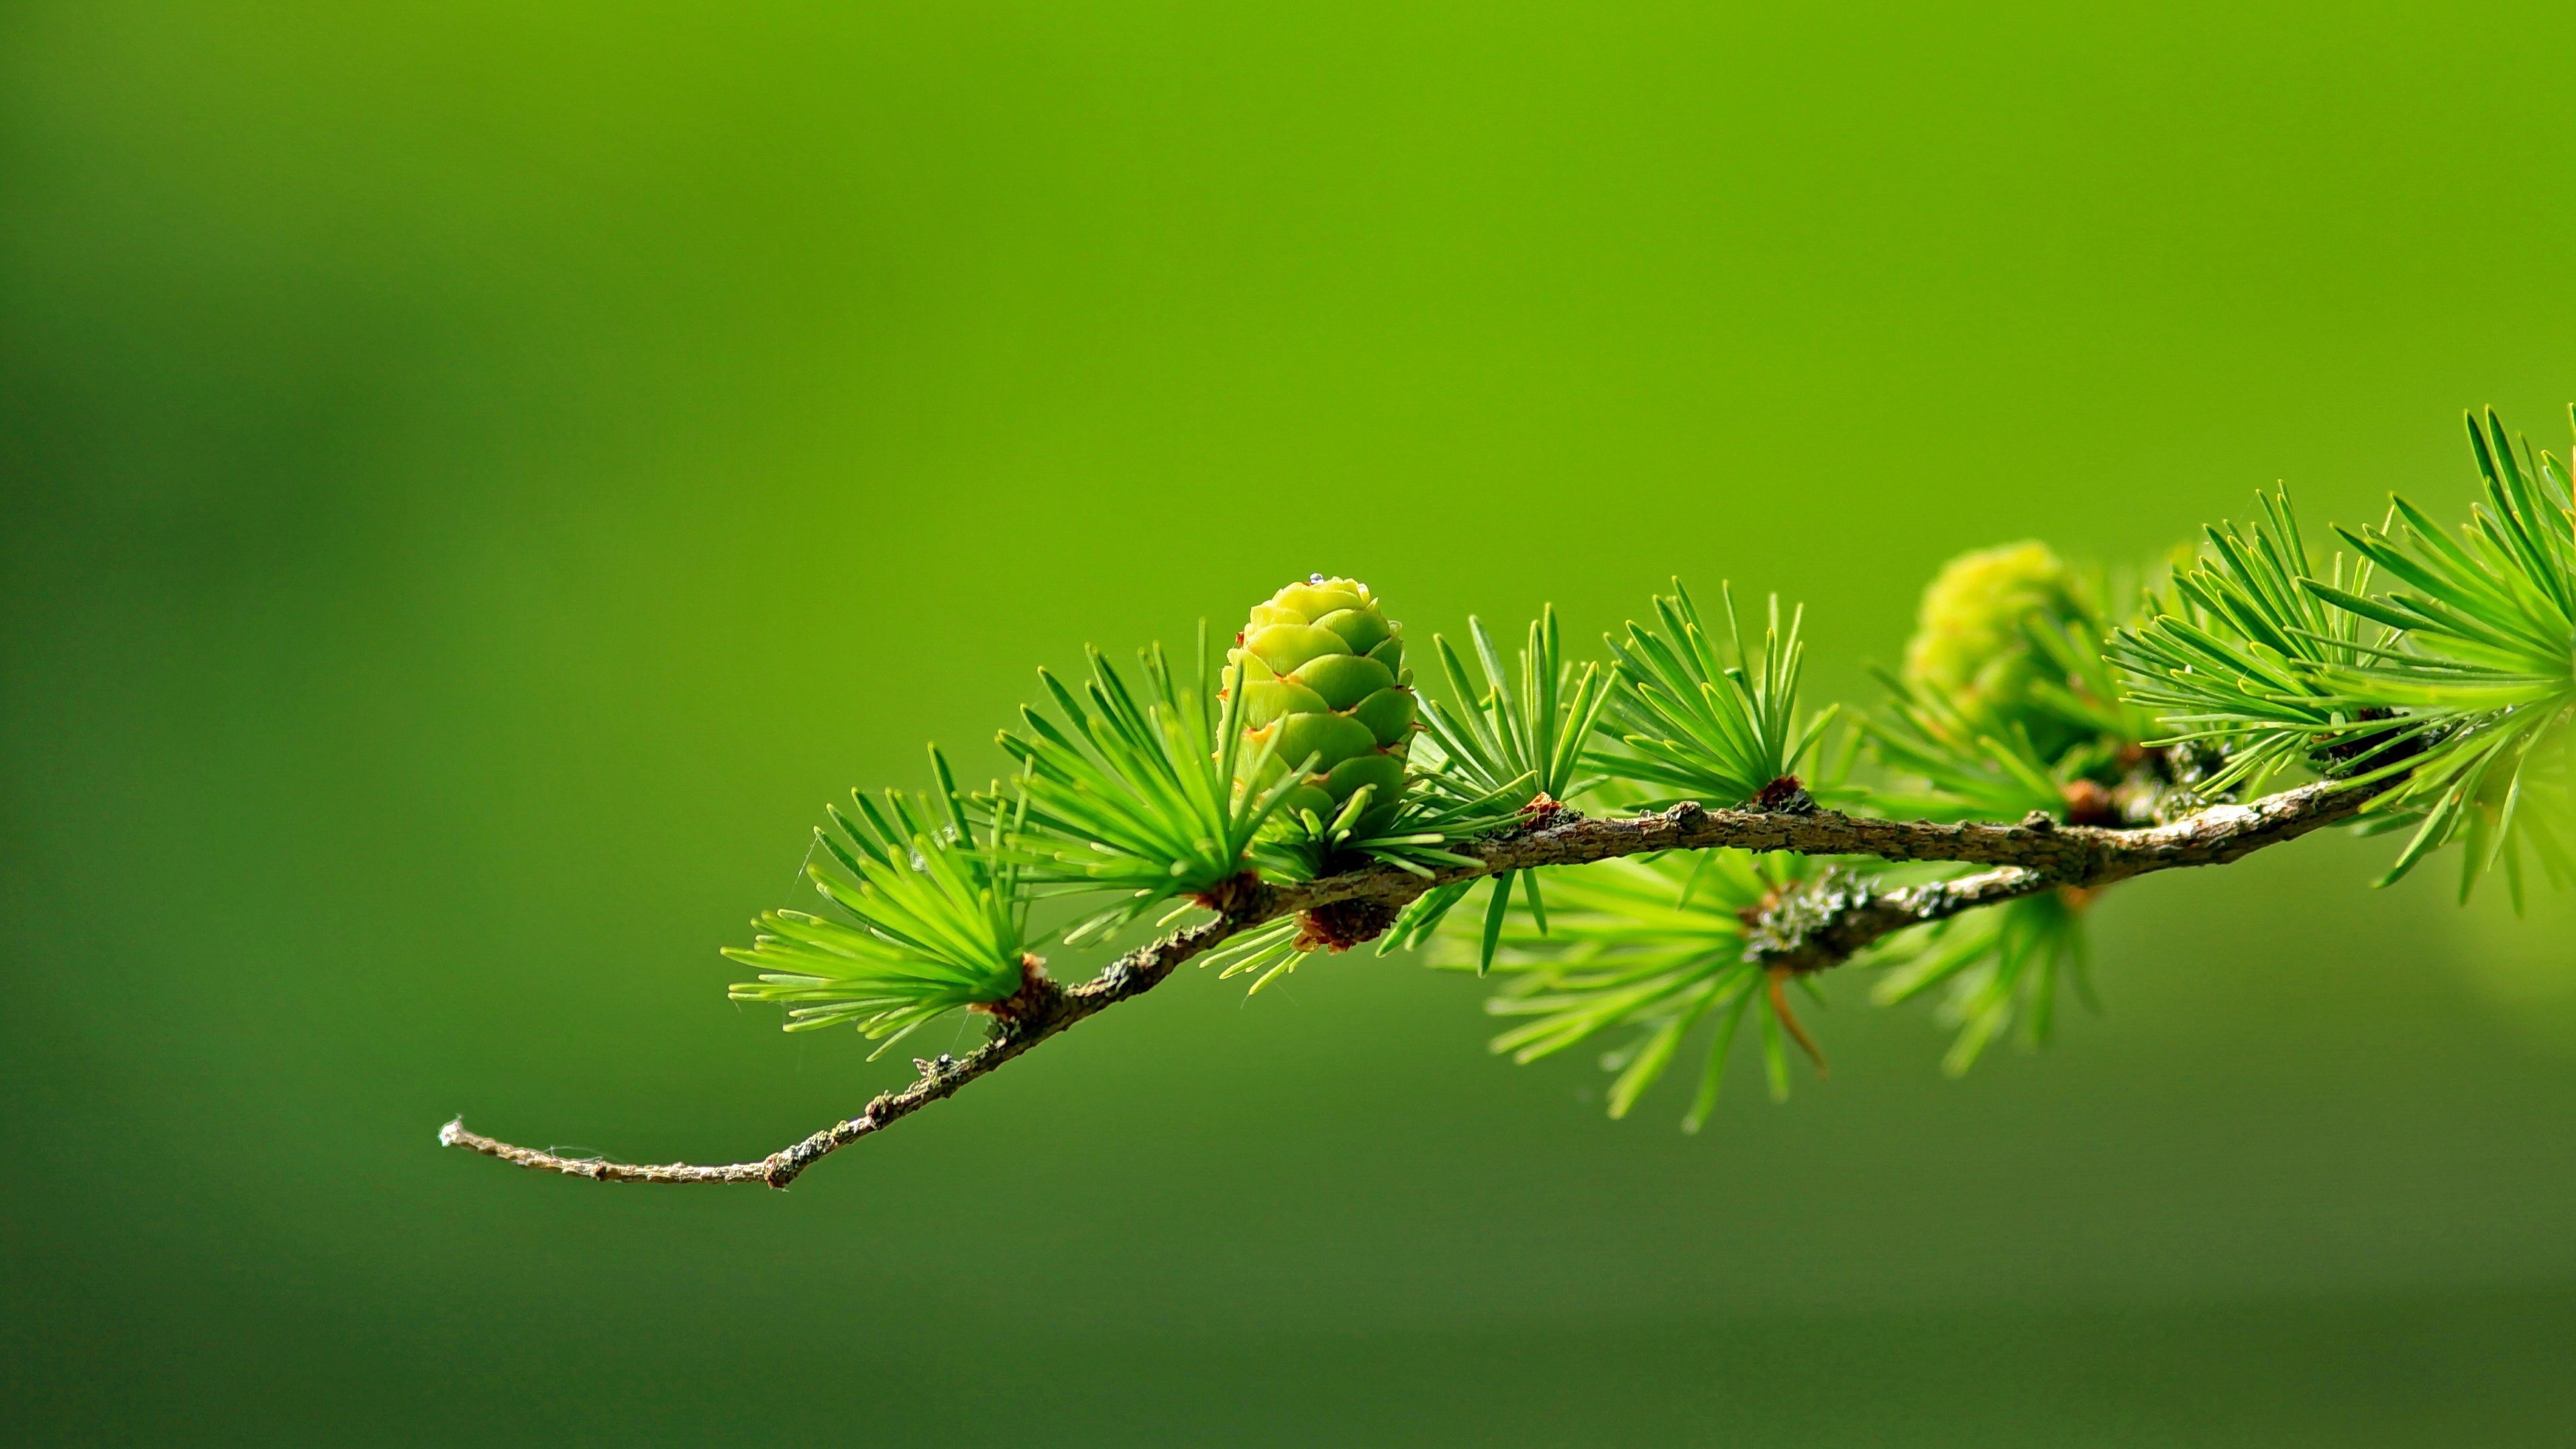 Pine twig with young checkers on a delicate green background